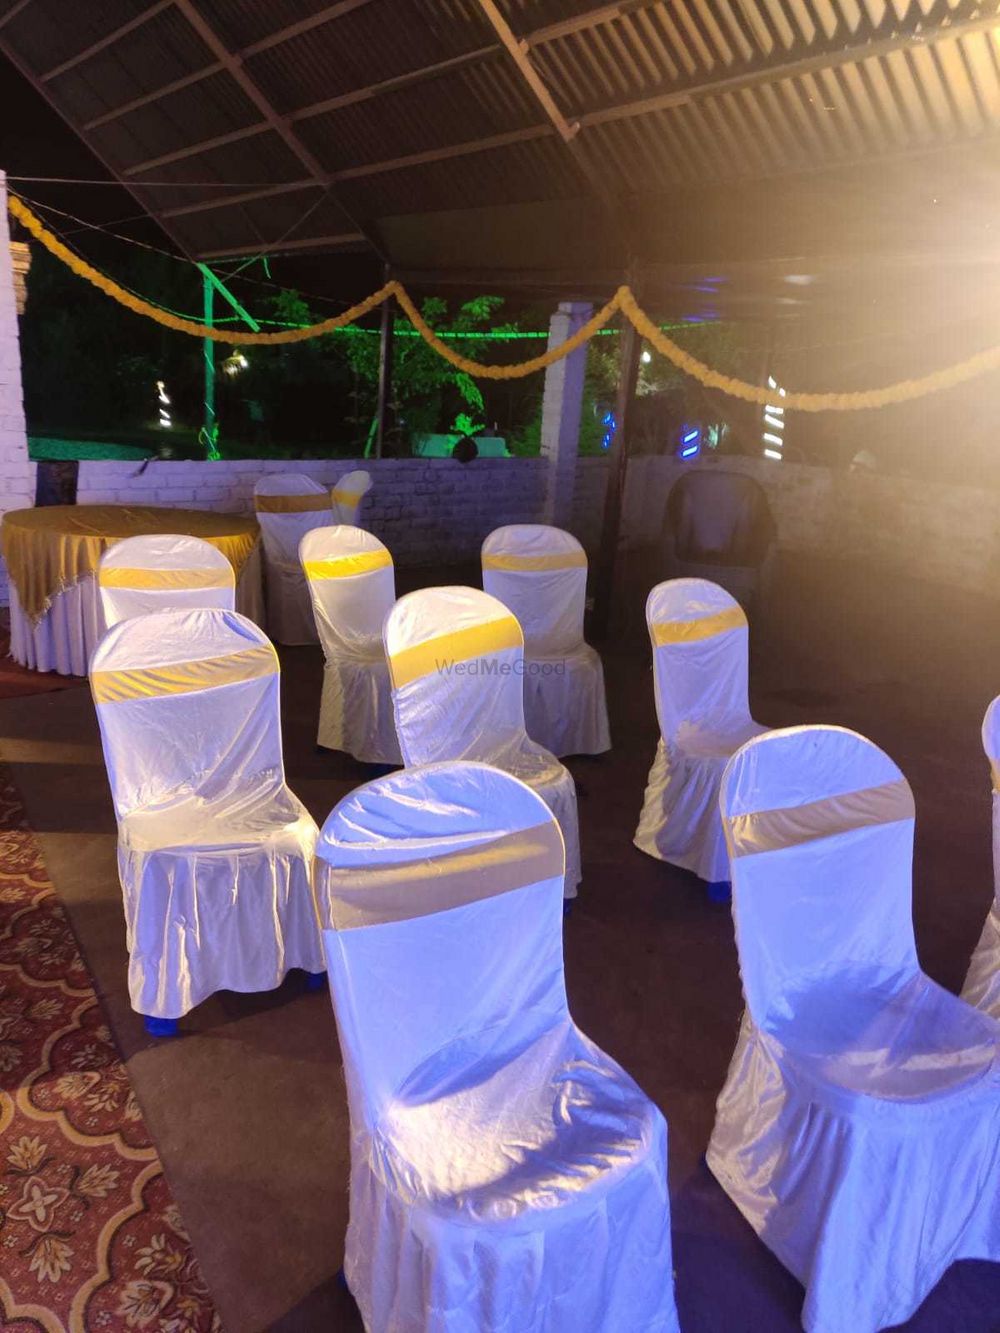 Photo By Aura Foothills - Venues